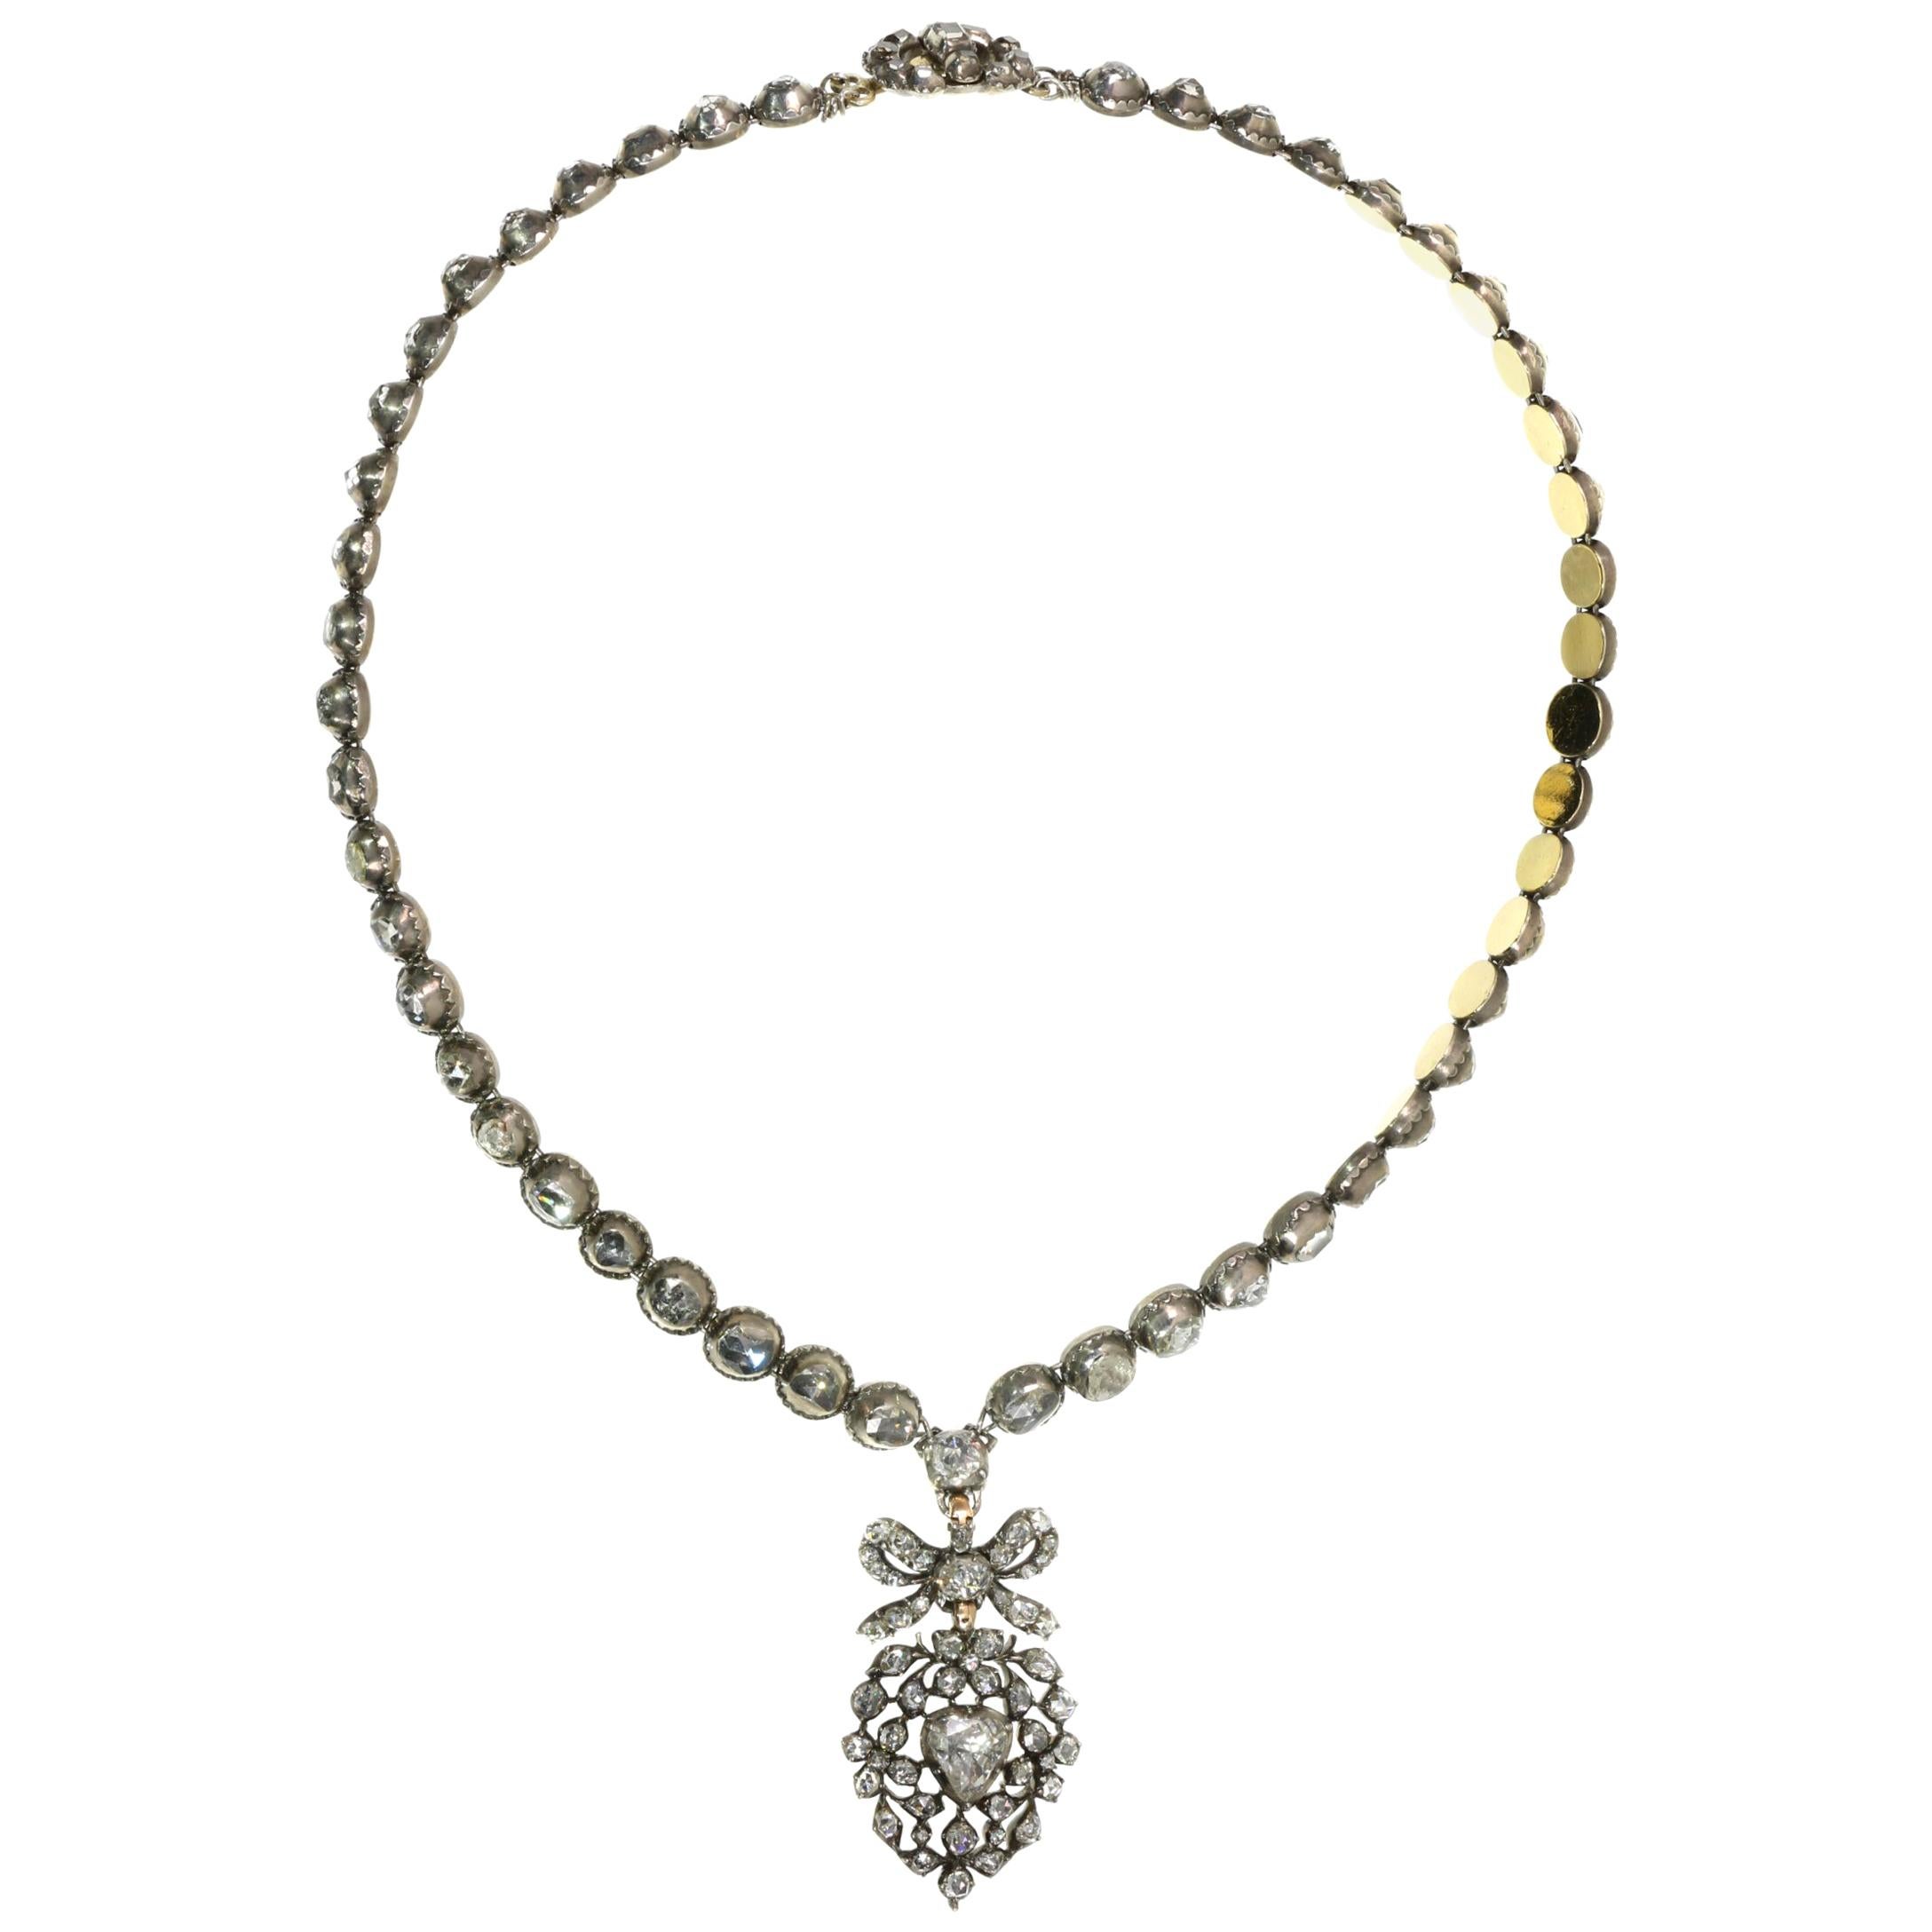 Rose Cut Diamond Riviere Necklace with a Diamond Set Crowned Heart Pendant